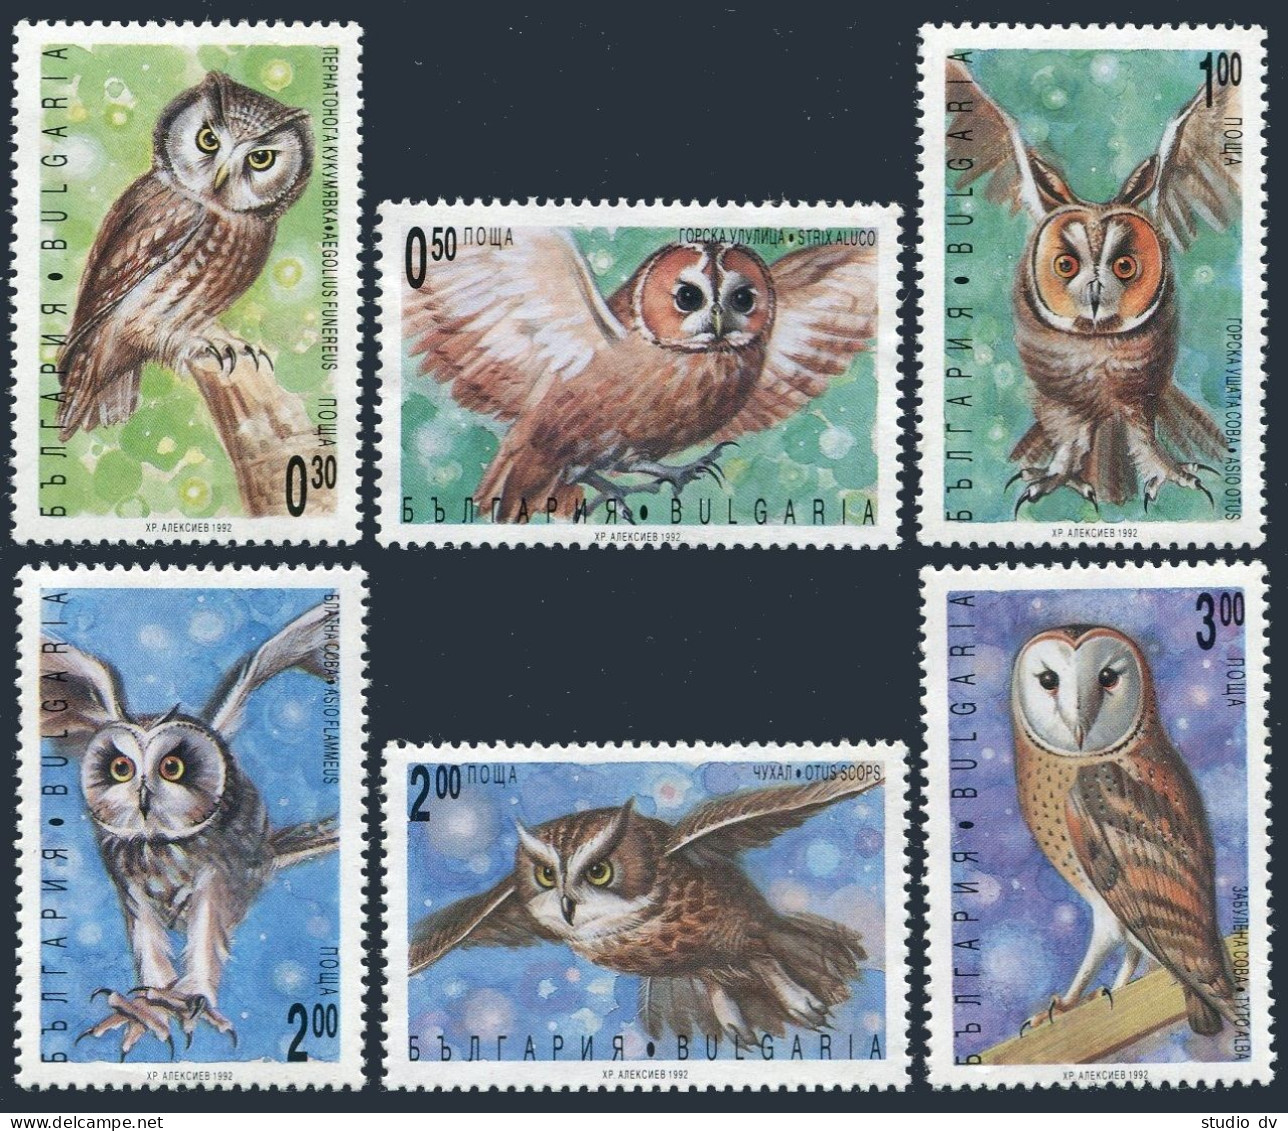 Bulgaria 3749-3754, MNH. Michel 4032-4037. Owls 1992. - Unused Stamps